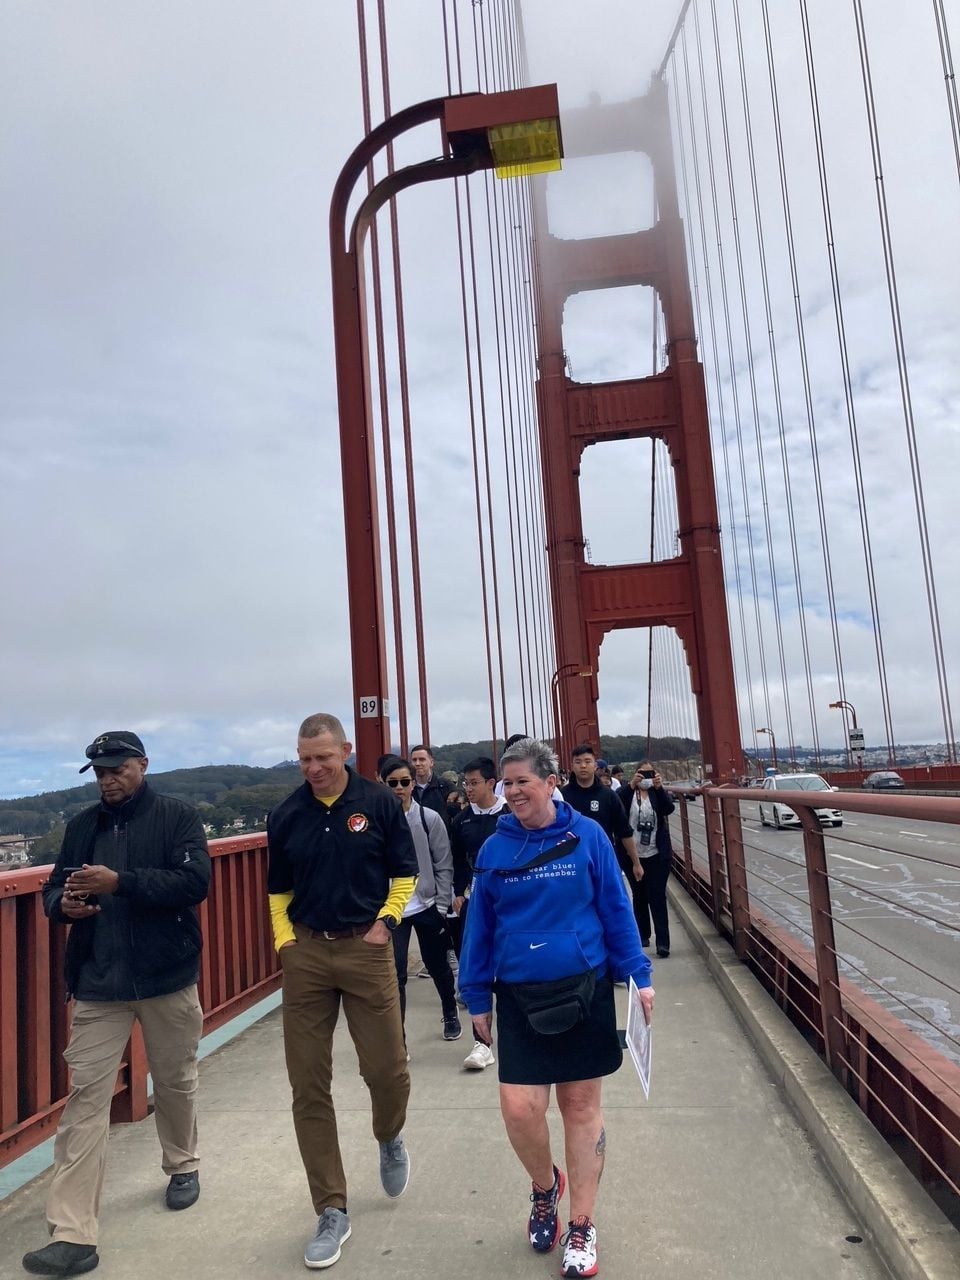 Sergeant Major of the Army Michael Grinston, left, talks with Gold Star mom Roxane Langevin, right, on San Francisco's Golden Gate Bridge, May 28, 2022, during Memorial Day weekend. (Meghann Myers/staff)